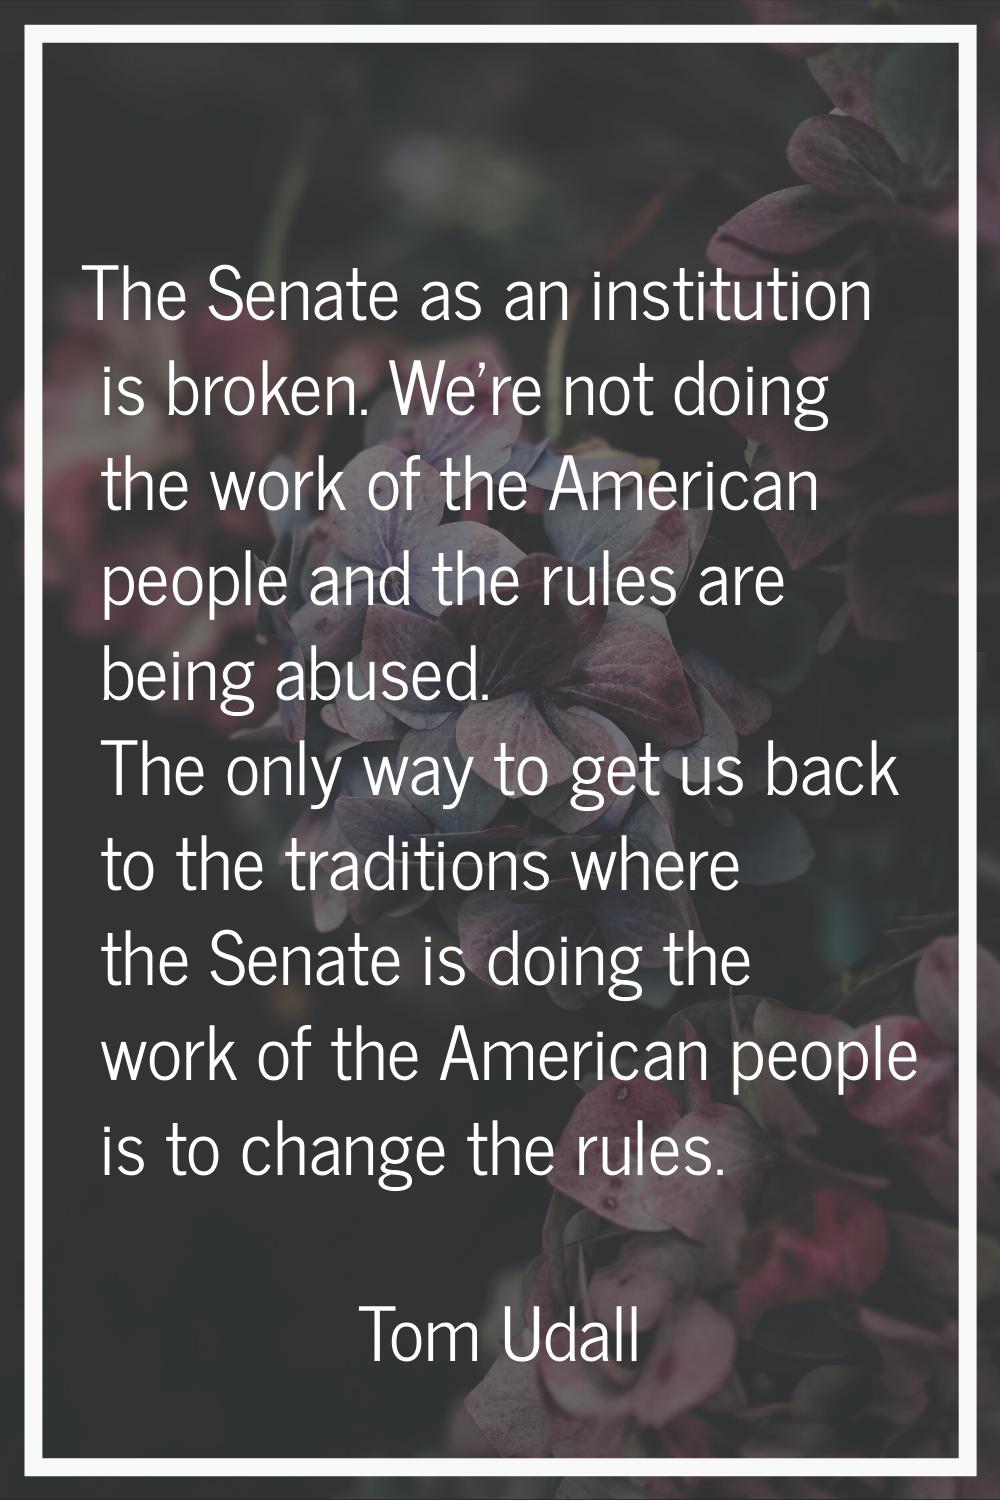 The Senate as an institution is broken. We're not doing the work of the American people and the rul